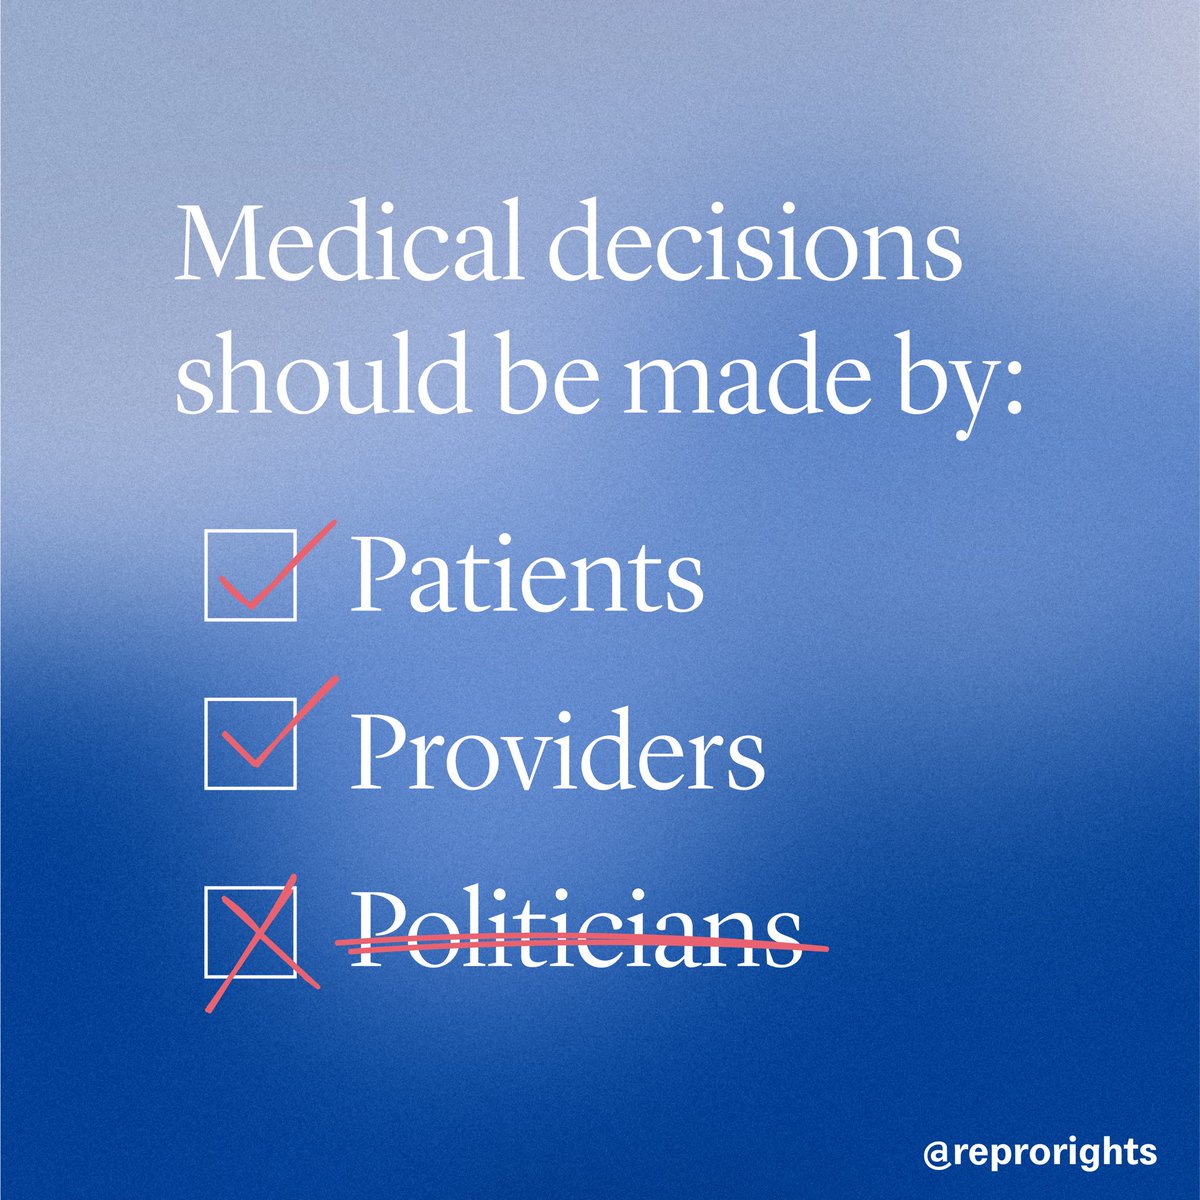 Decisions about your health, life, and future should be made by you and your doctor, not politicians with no medical training. This week, @ReproRights launched new legal action in ID, OK, and TN to keep bureaucrats out of the exam room. Get involved: Join the forward fight -…